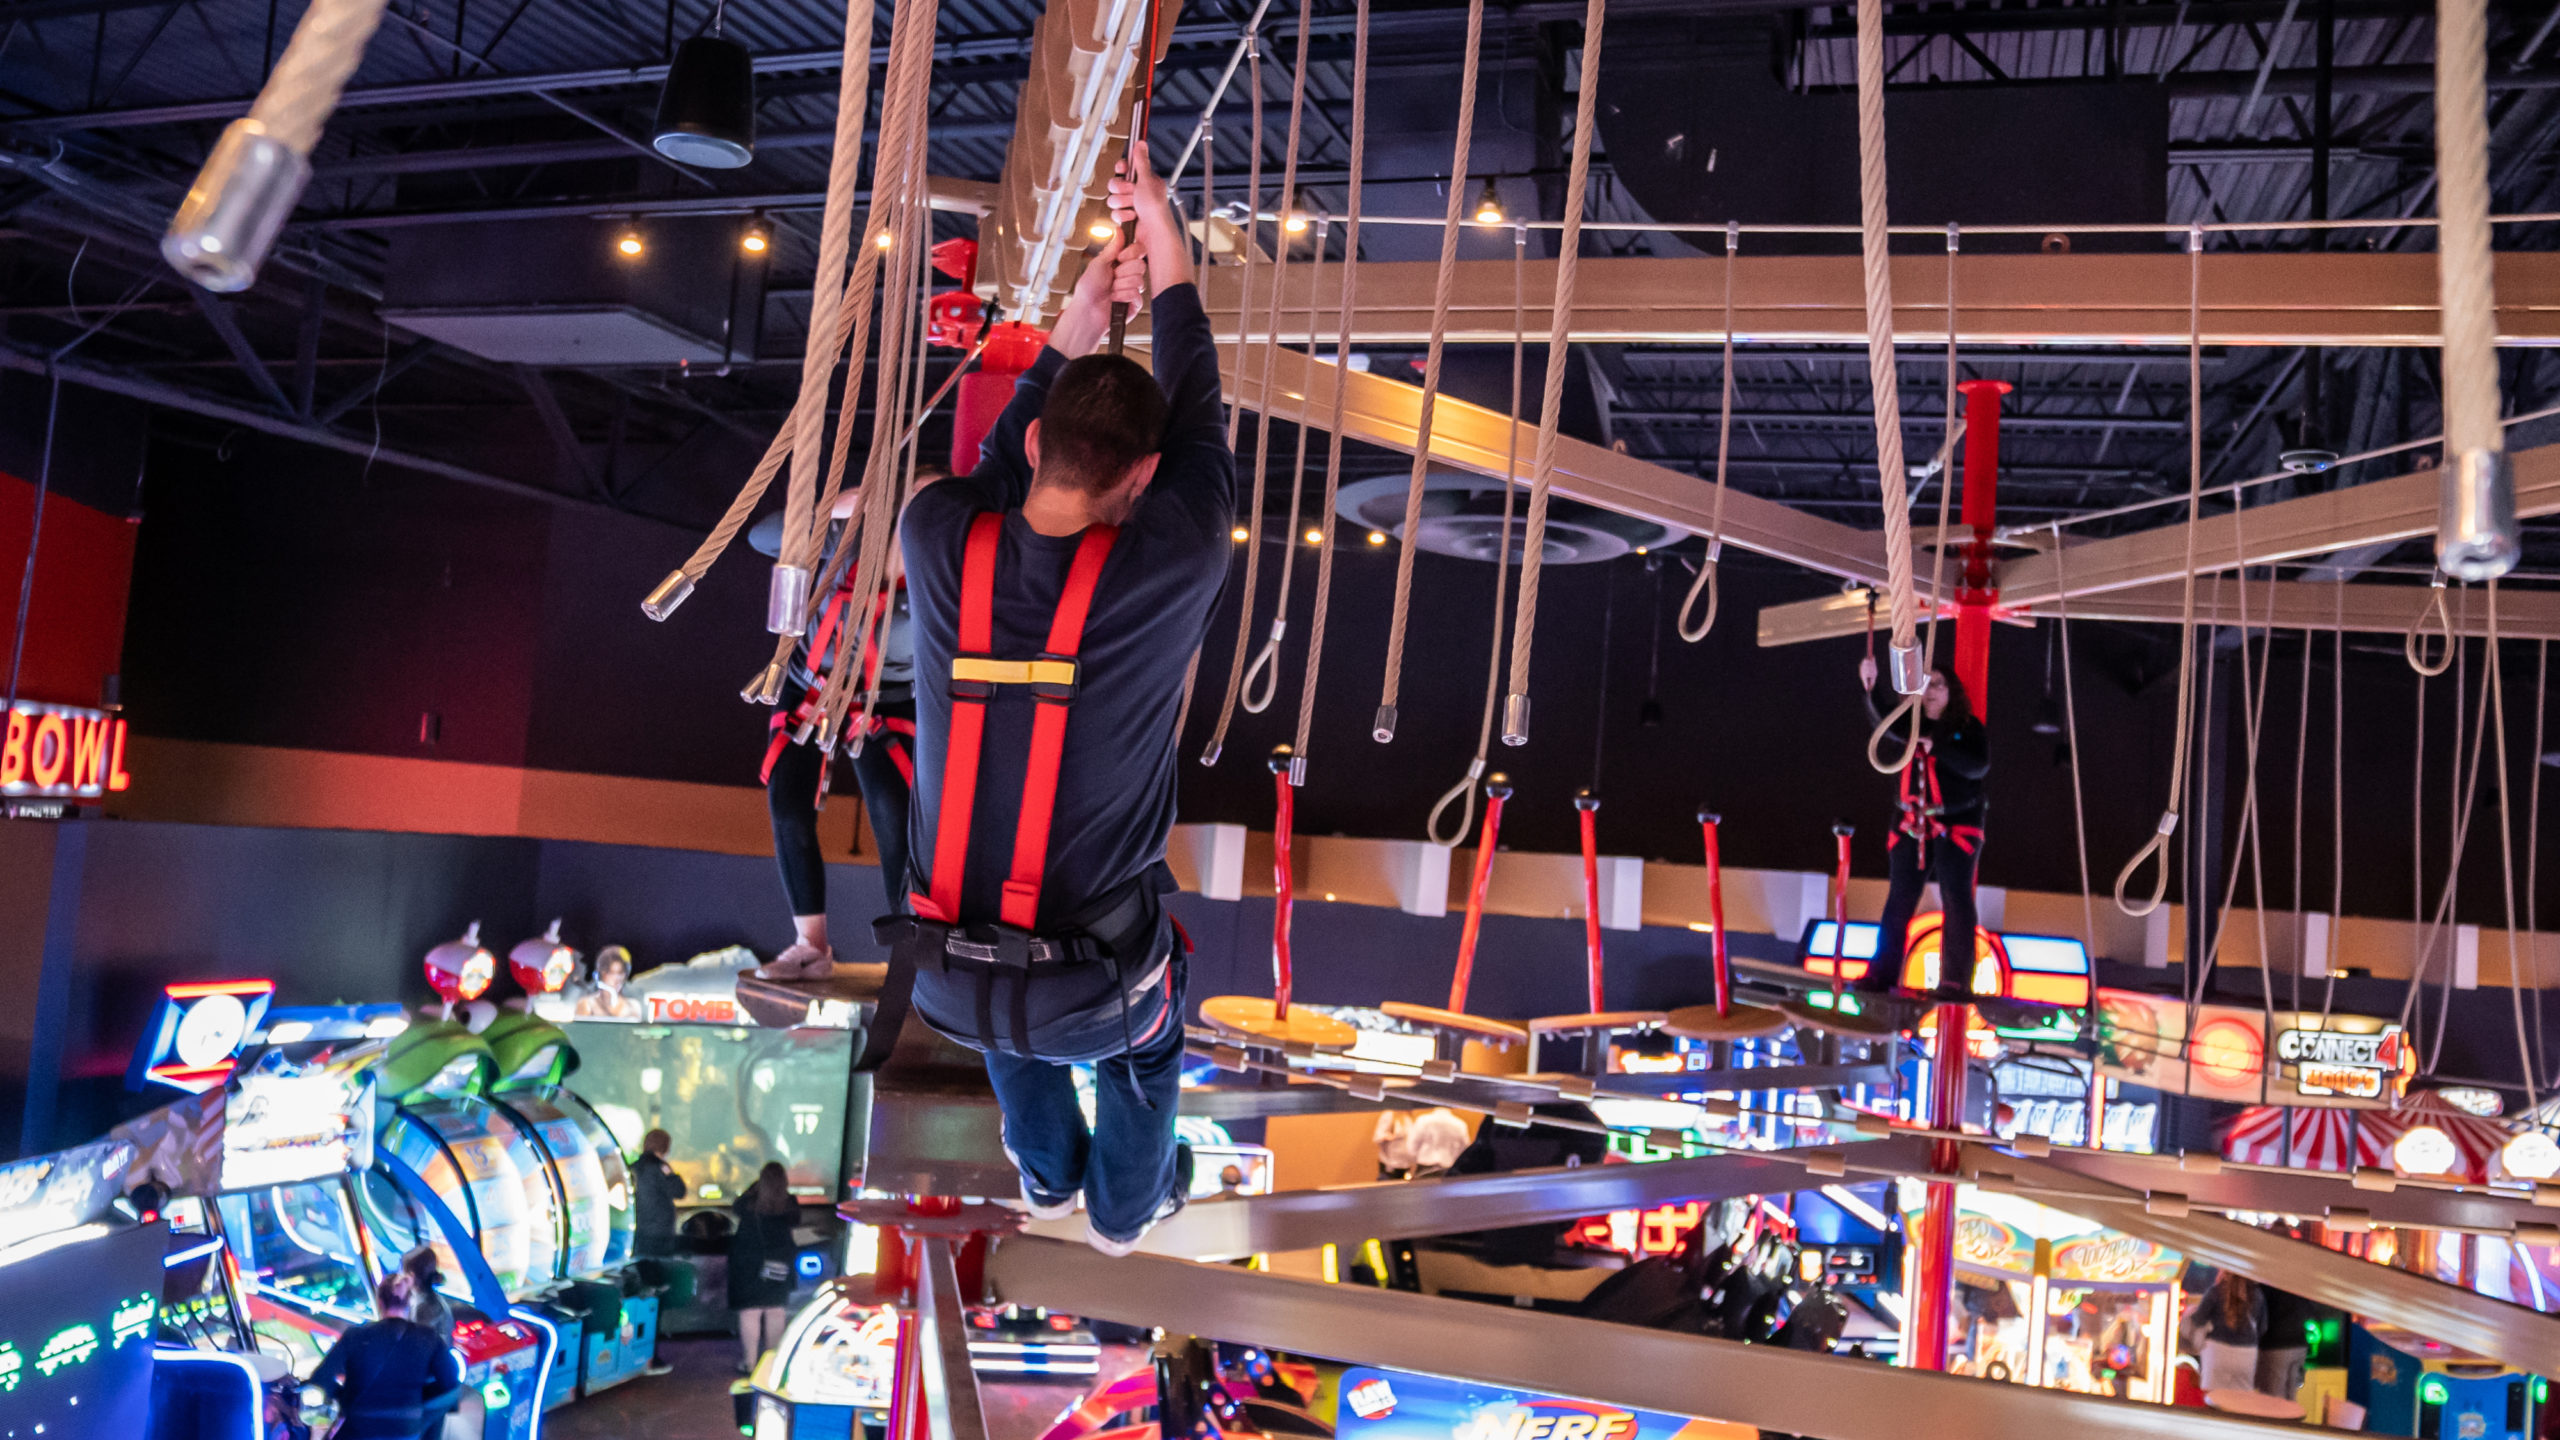 Indoor High Rope Course Team Building Activities near me